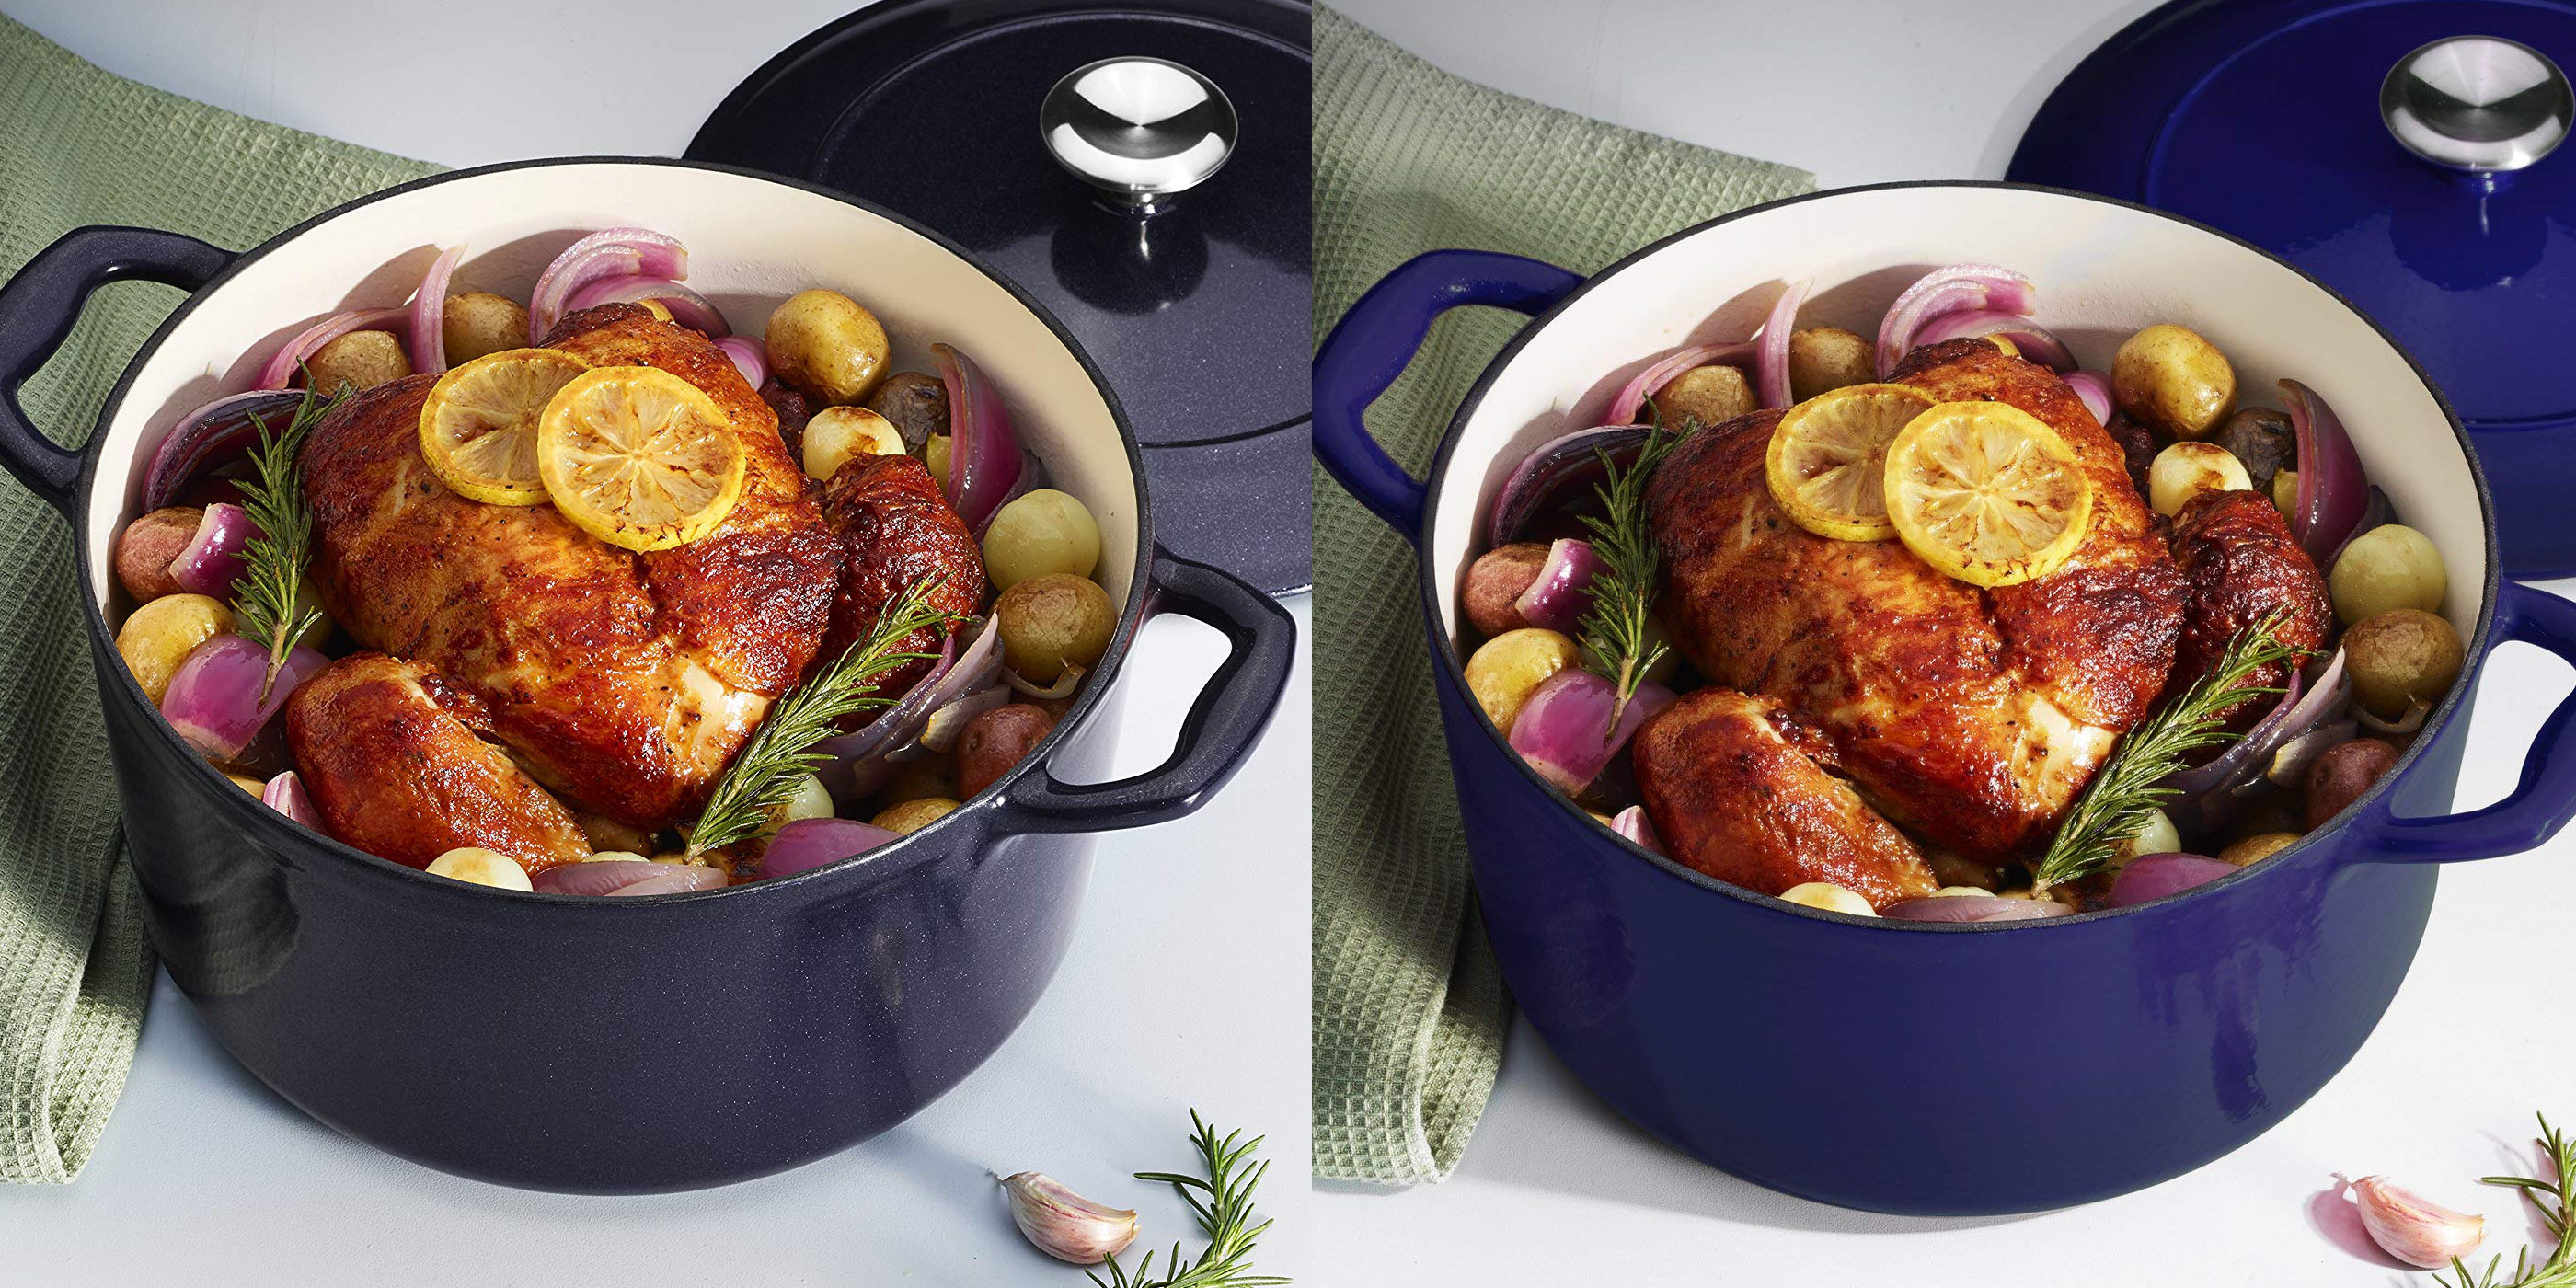 https://9to5toys.com/wp-content/uploads/sites/5/2018/11/Tramontina-80131-038DS-Enameled-Cast-Iron-Covered-Round-Dutch-Oven.jpg